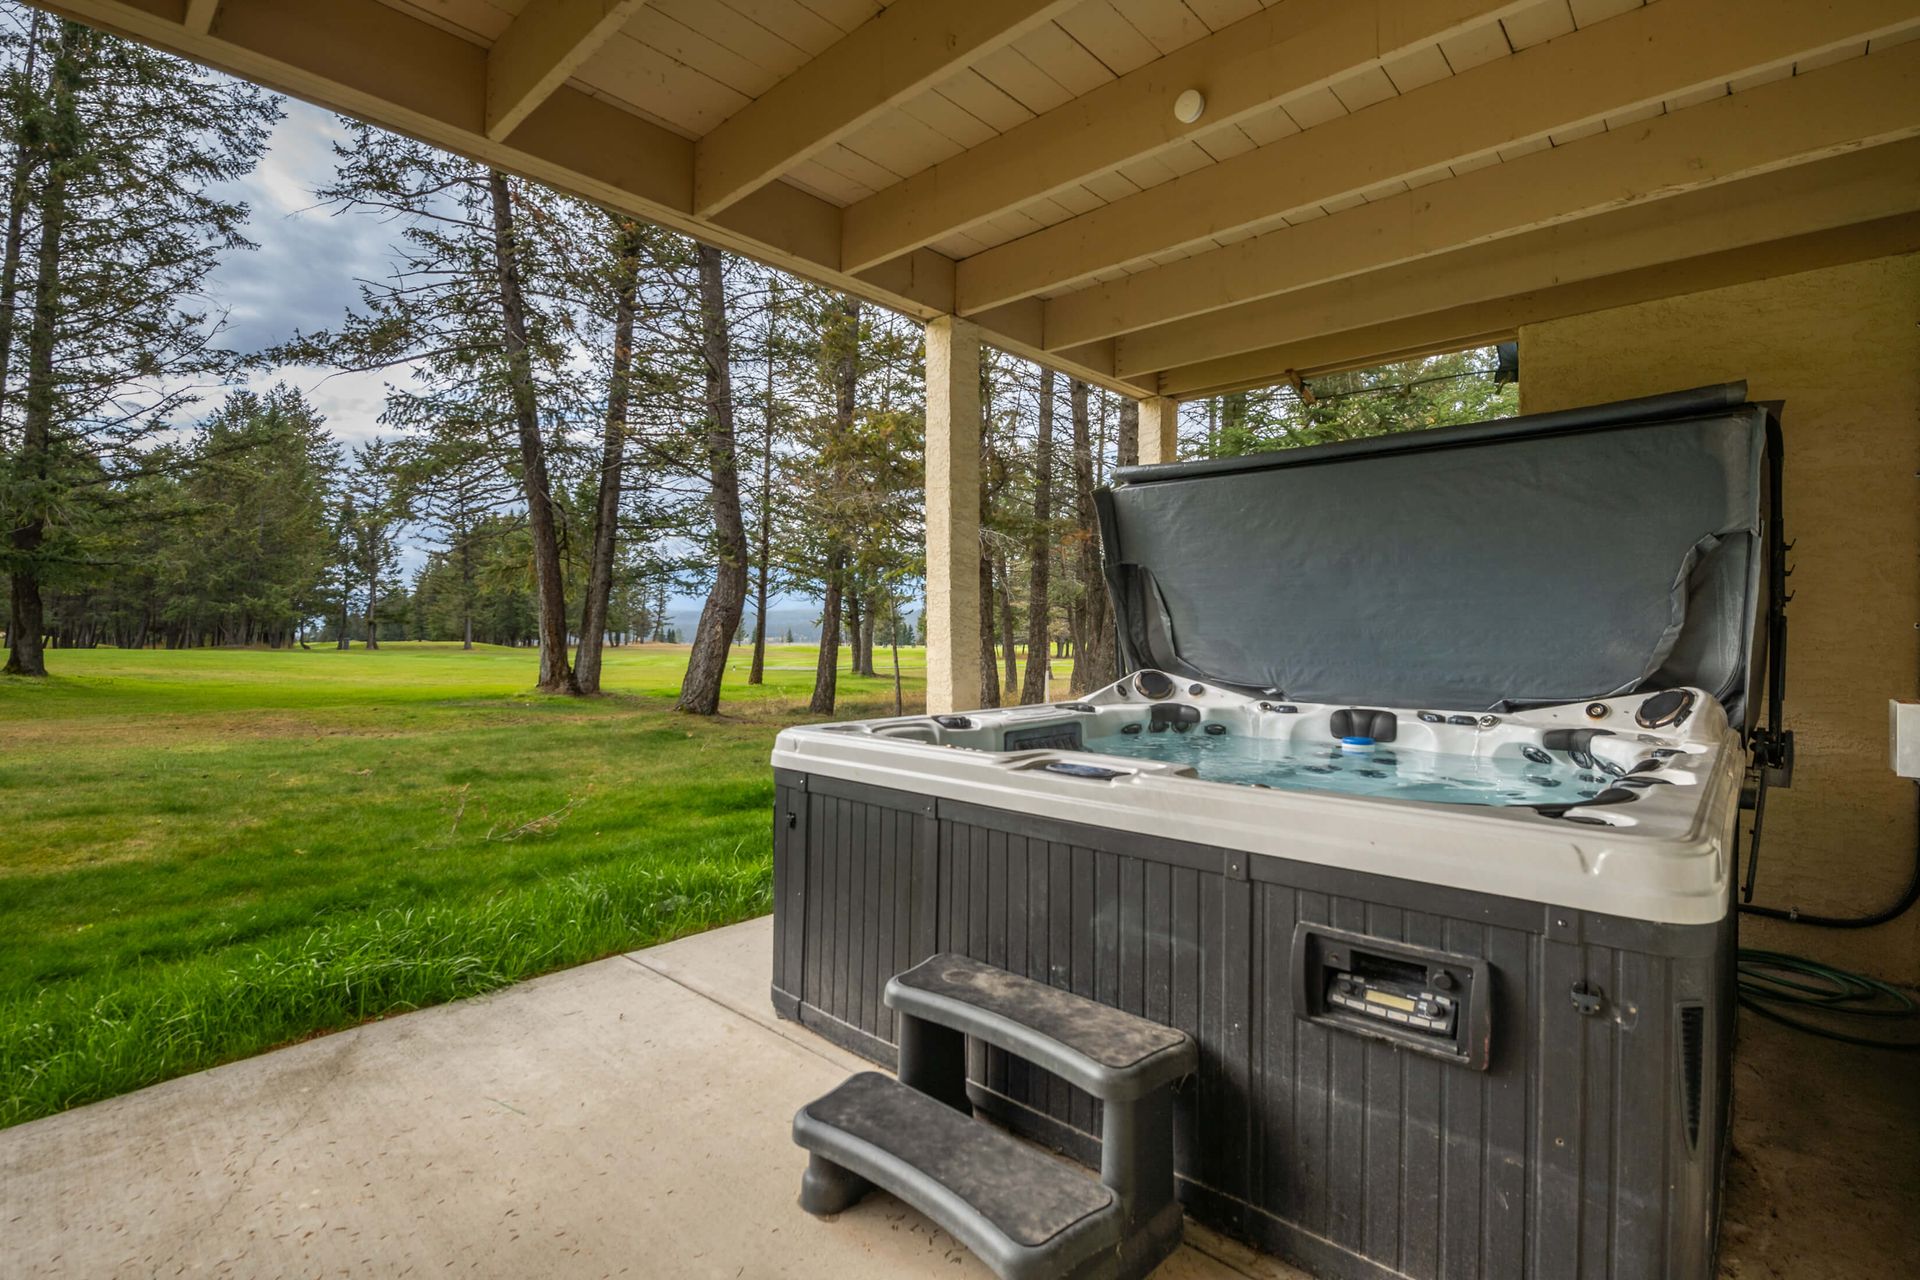 Private hot tub of Wide Open Spaces, a Radium BC Vacation Rental hosted by Aisling Baile Property Management.